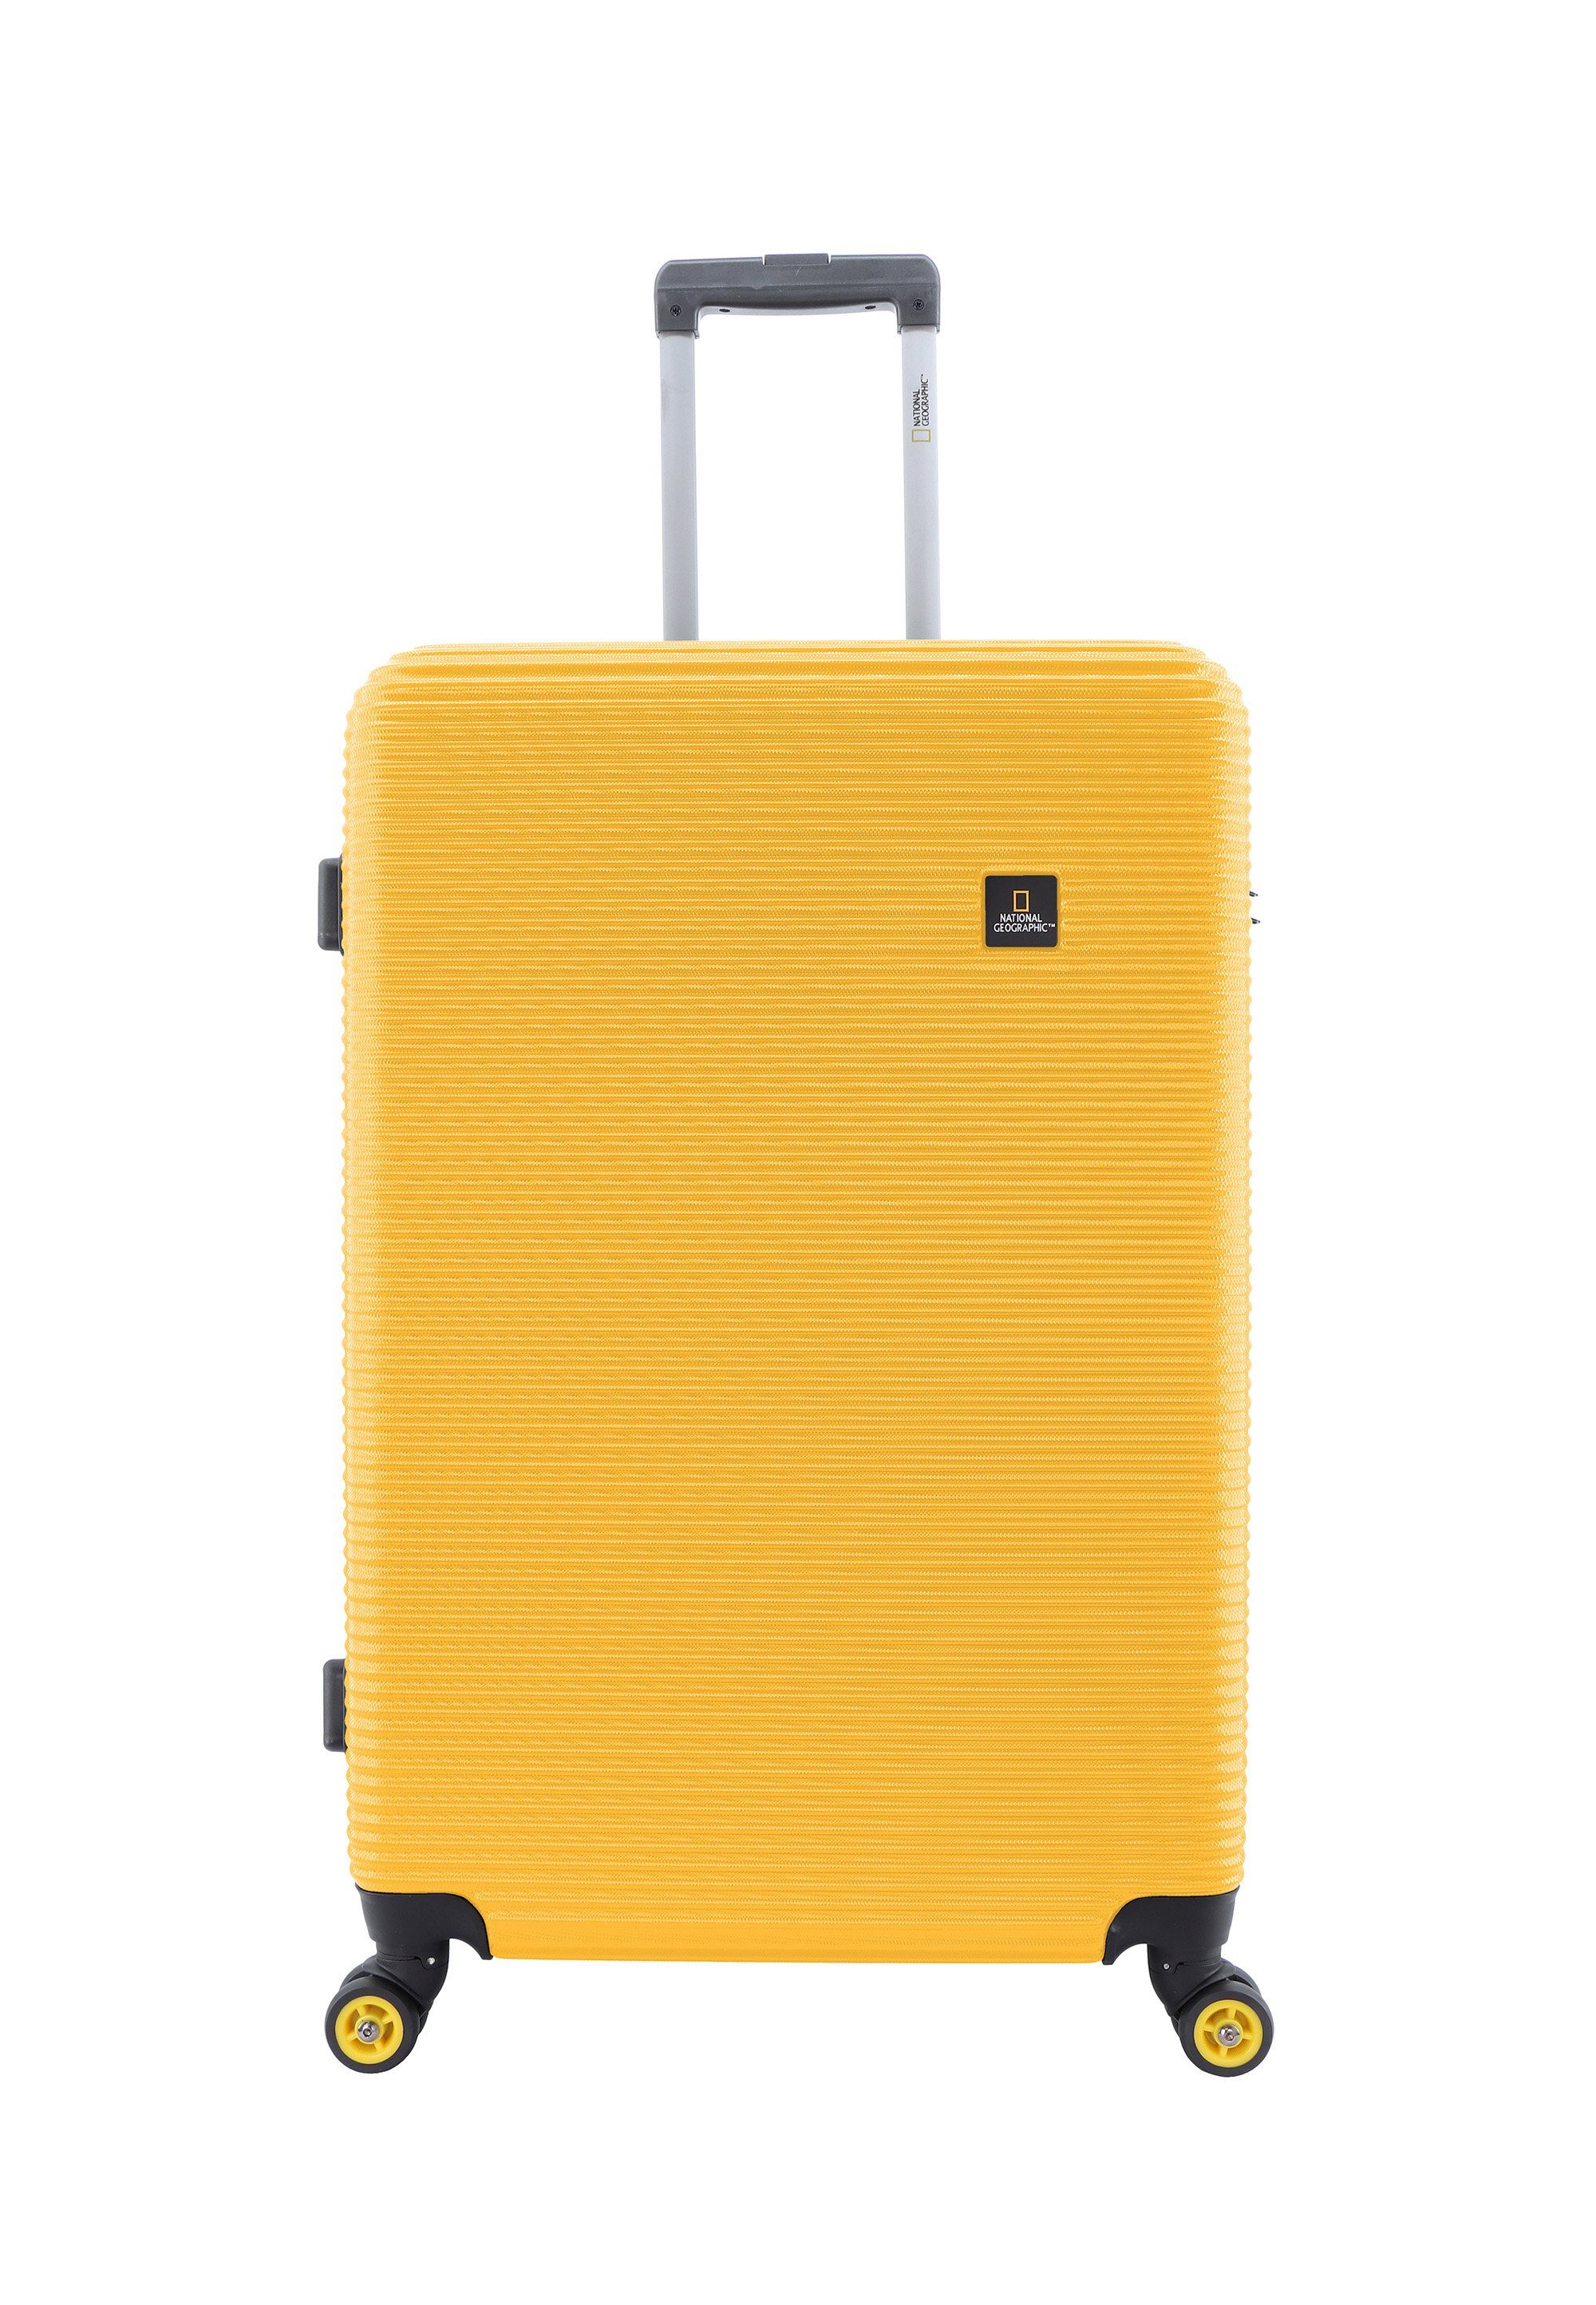 NATIONAL GEOGRAPHIC Koffer Abroad, mit integriertem Aluminium-Trolley-System